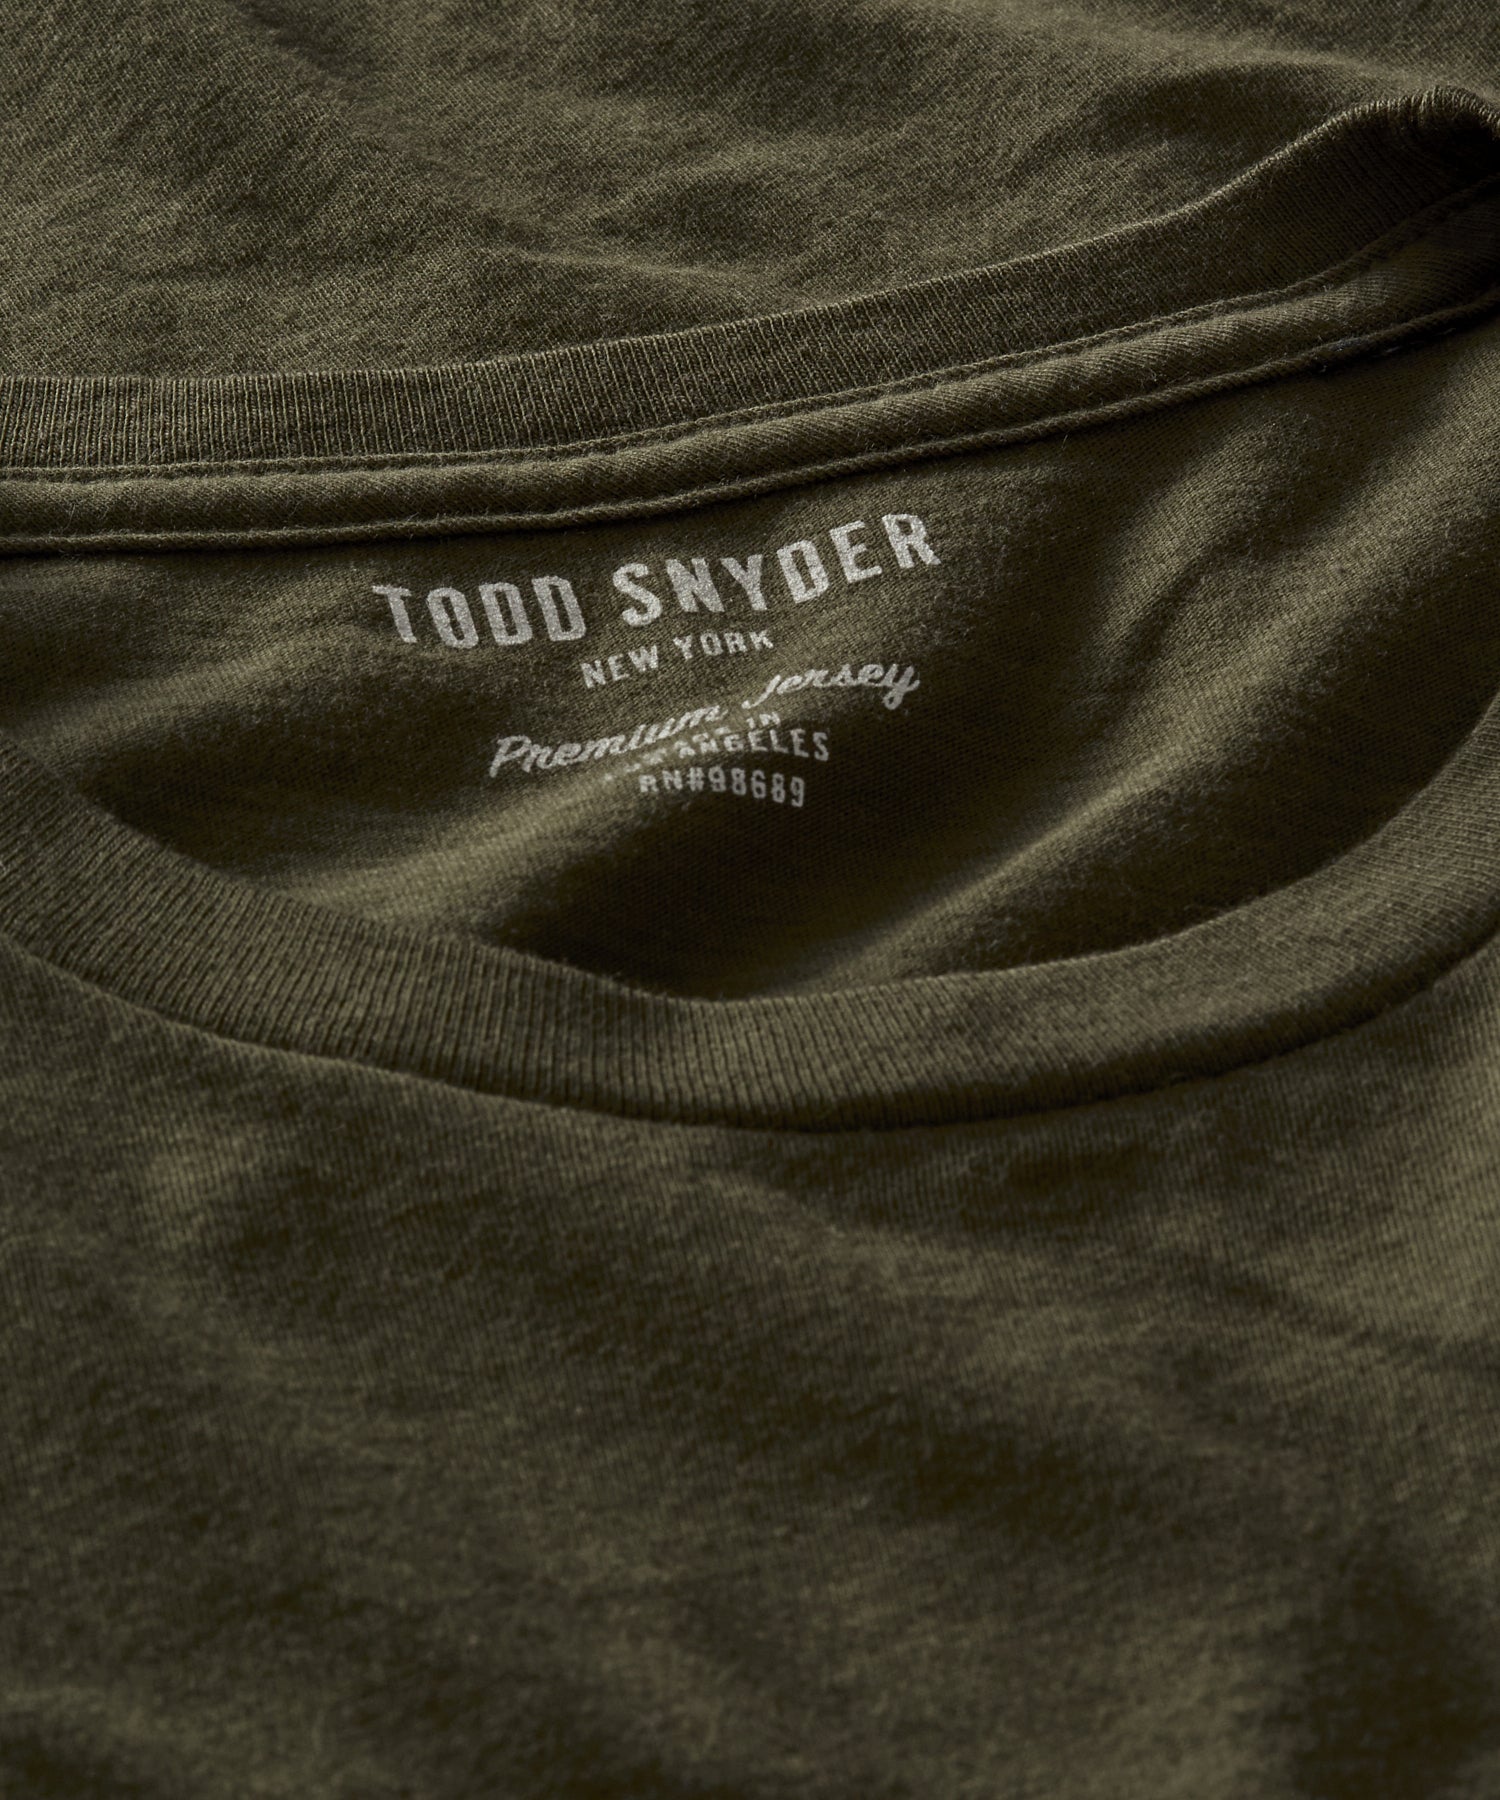 Todd Snyder Made in L.A. Premium Jersey T-Shirt in Grey Heather